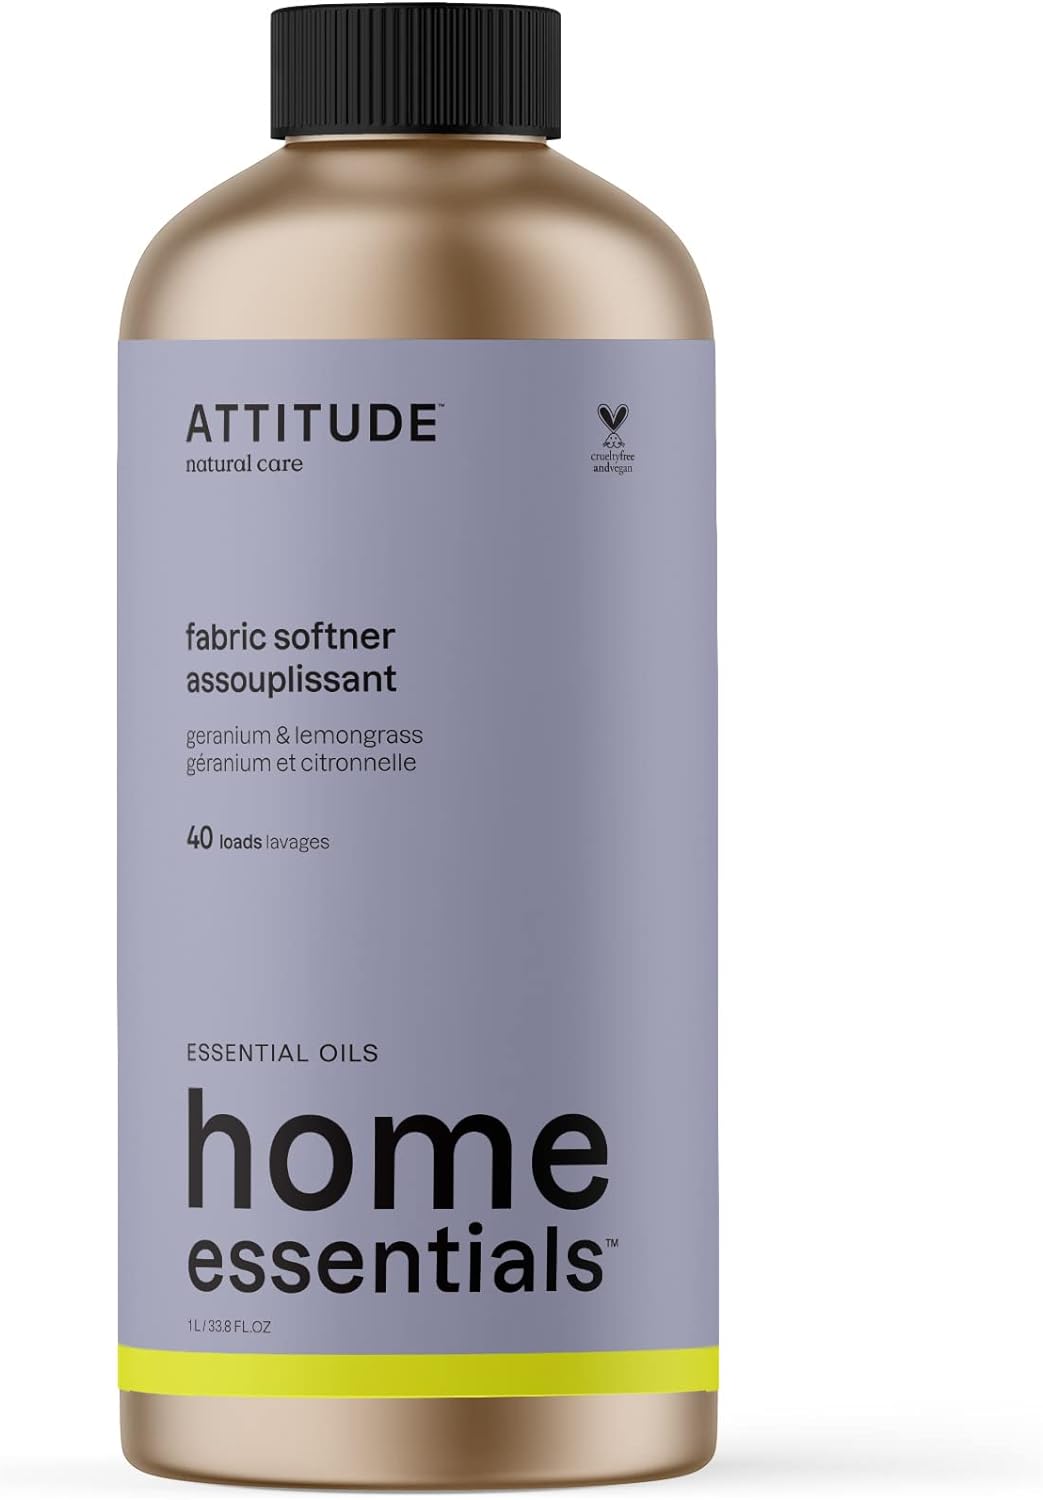 ATTITUDE Fabric Softener with Essential Oils, Vegan, Plant and Mineral-Based Ingredients, HE, Refillable Aluminum Bottle, 40 Loads, Geranium and Lemongrass, 33.8 Fl Oz